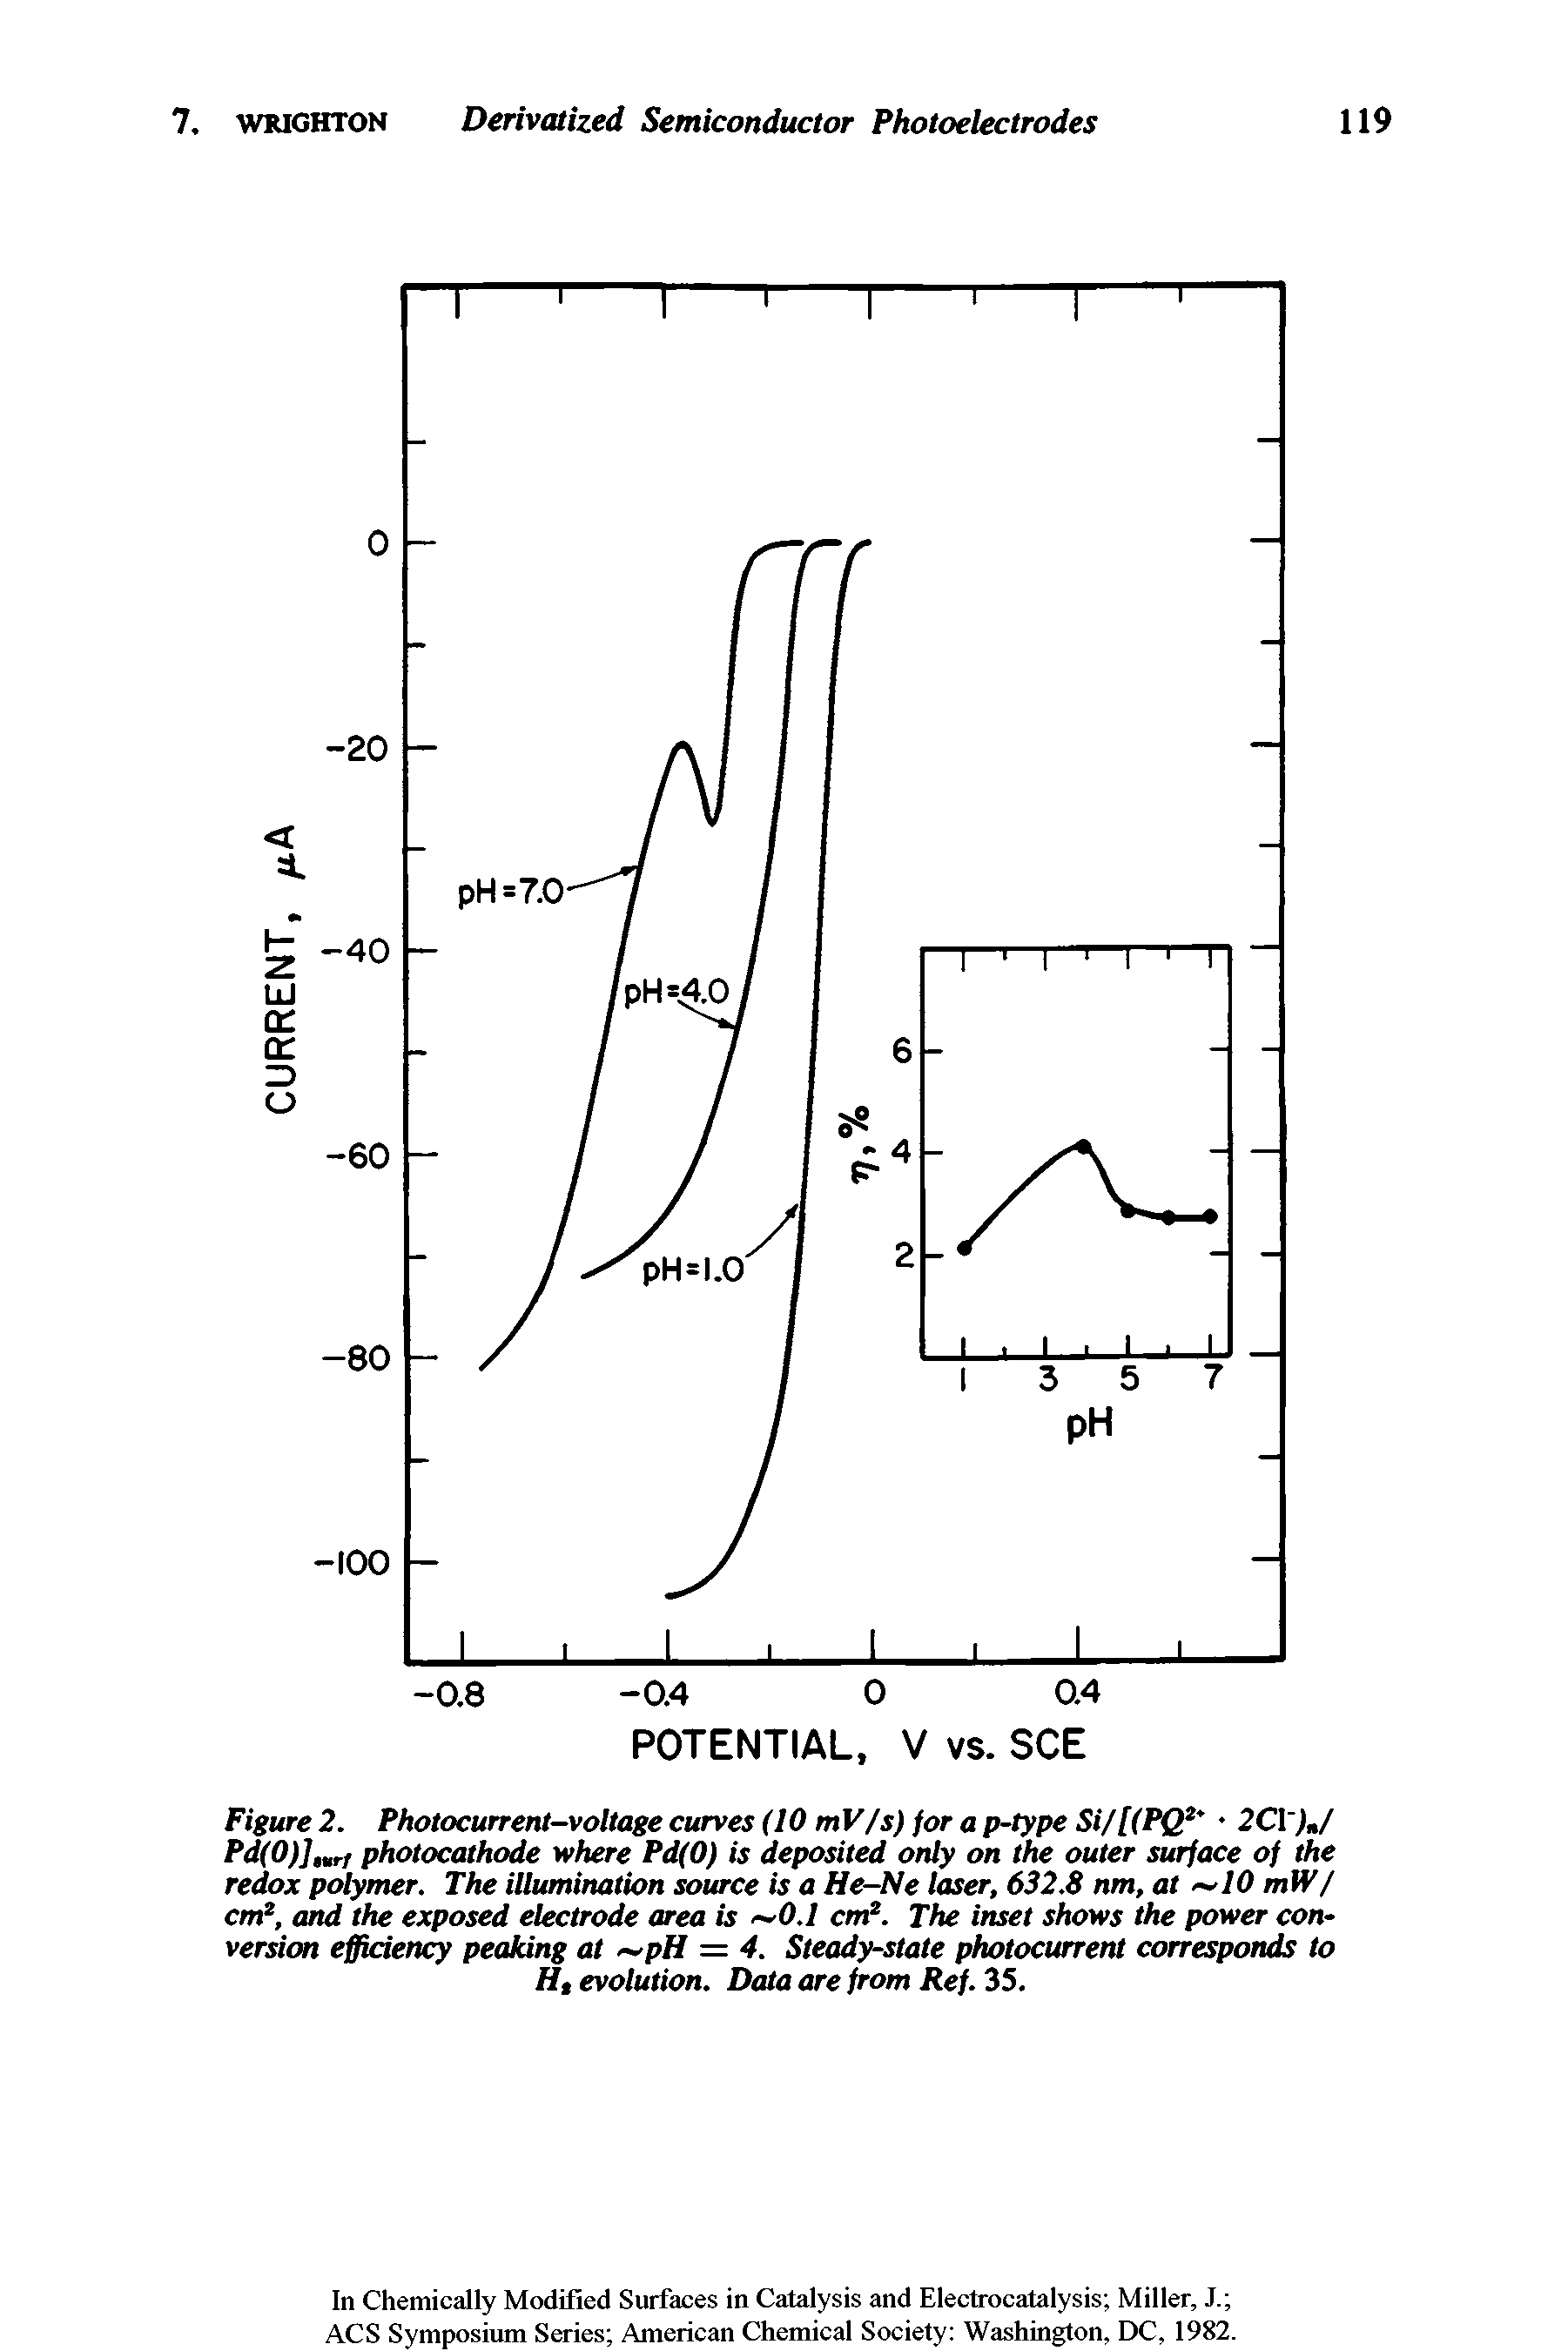 Figure 2. Photocurrent-voltage curves (10 mV/s) for a p-type Si/[(PQ 2C )J Pd(0)]mrt photocathode where Pd(0) is deposited only on the outer surface of the redox polymer. The illumination source is a He-Ne laser, 632.8 nm, at 10 mW/ cm2, and the exposed electrode area is 0.1 cmi2. The inset shows the power conversion efficiency peaking at pH = 4. Steady-state photocurrent corresponds to H, evolution. Data are from Ref. 35.